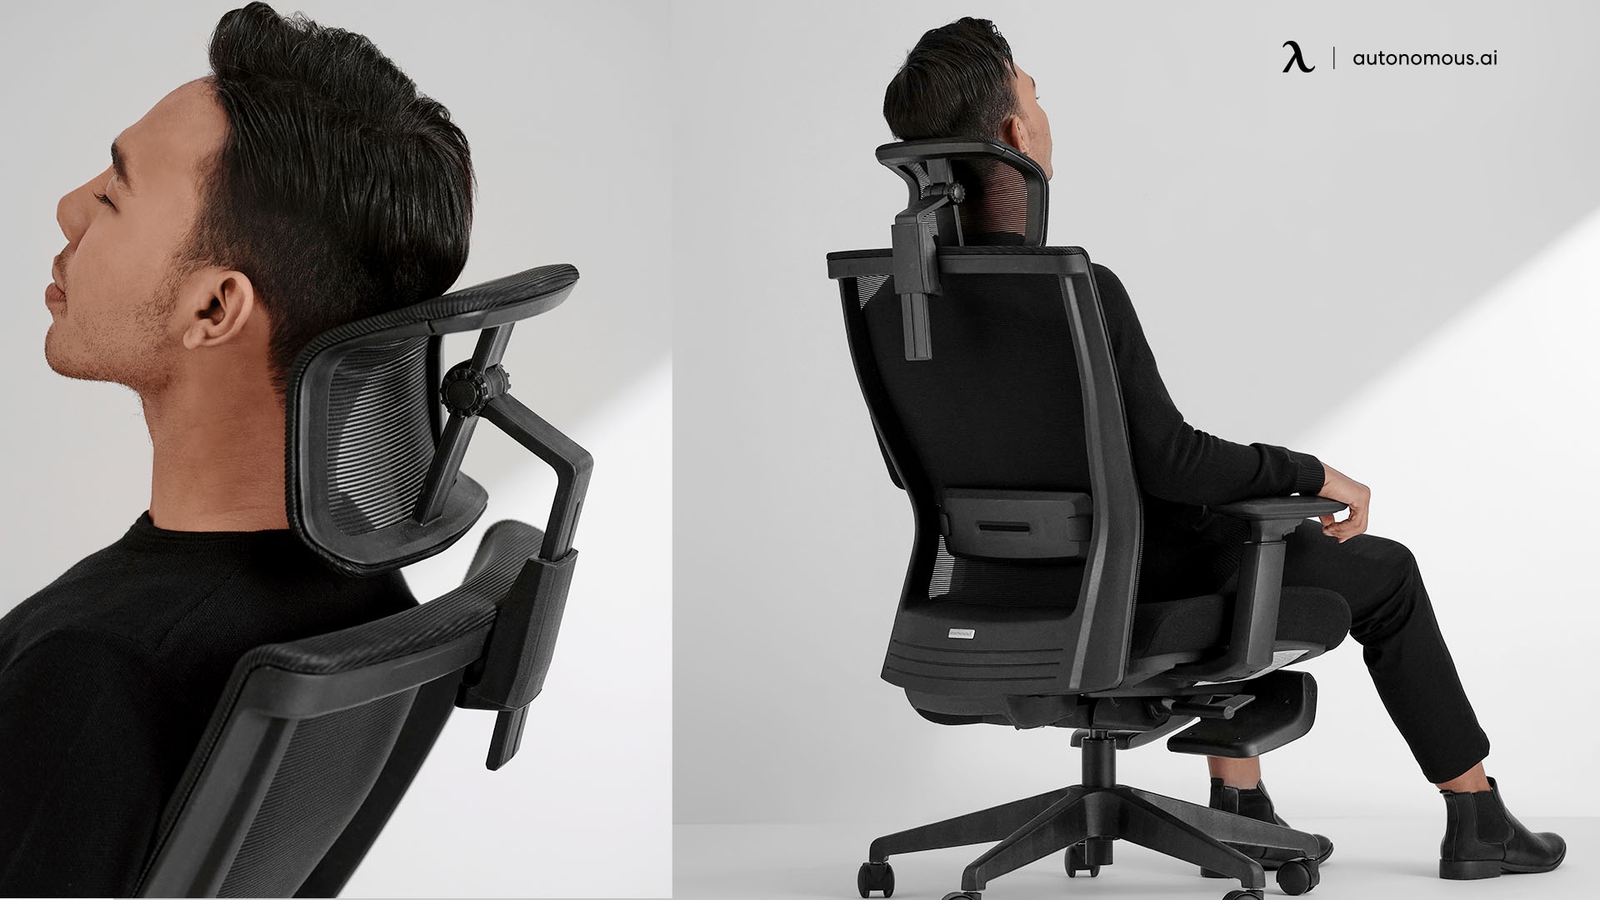 The Computer Chair With a Headrest: Buyer’s Guide